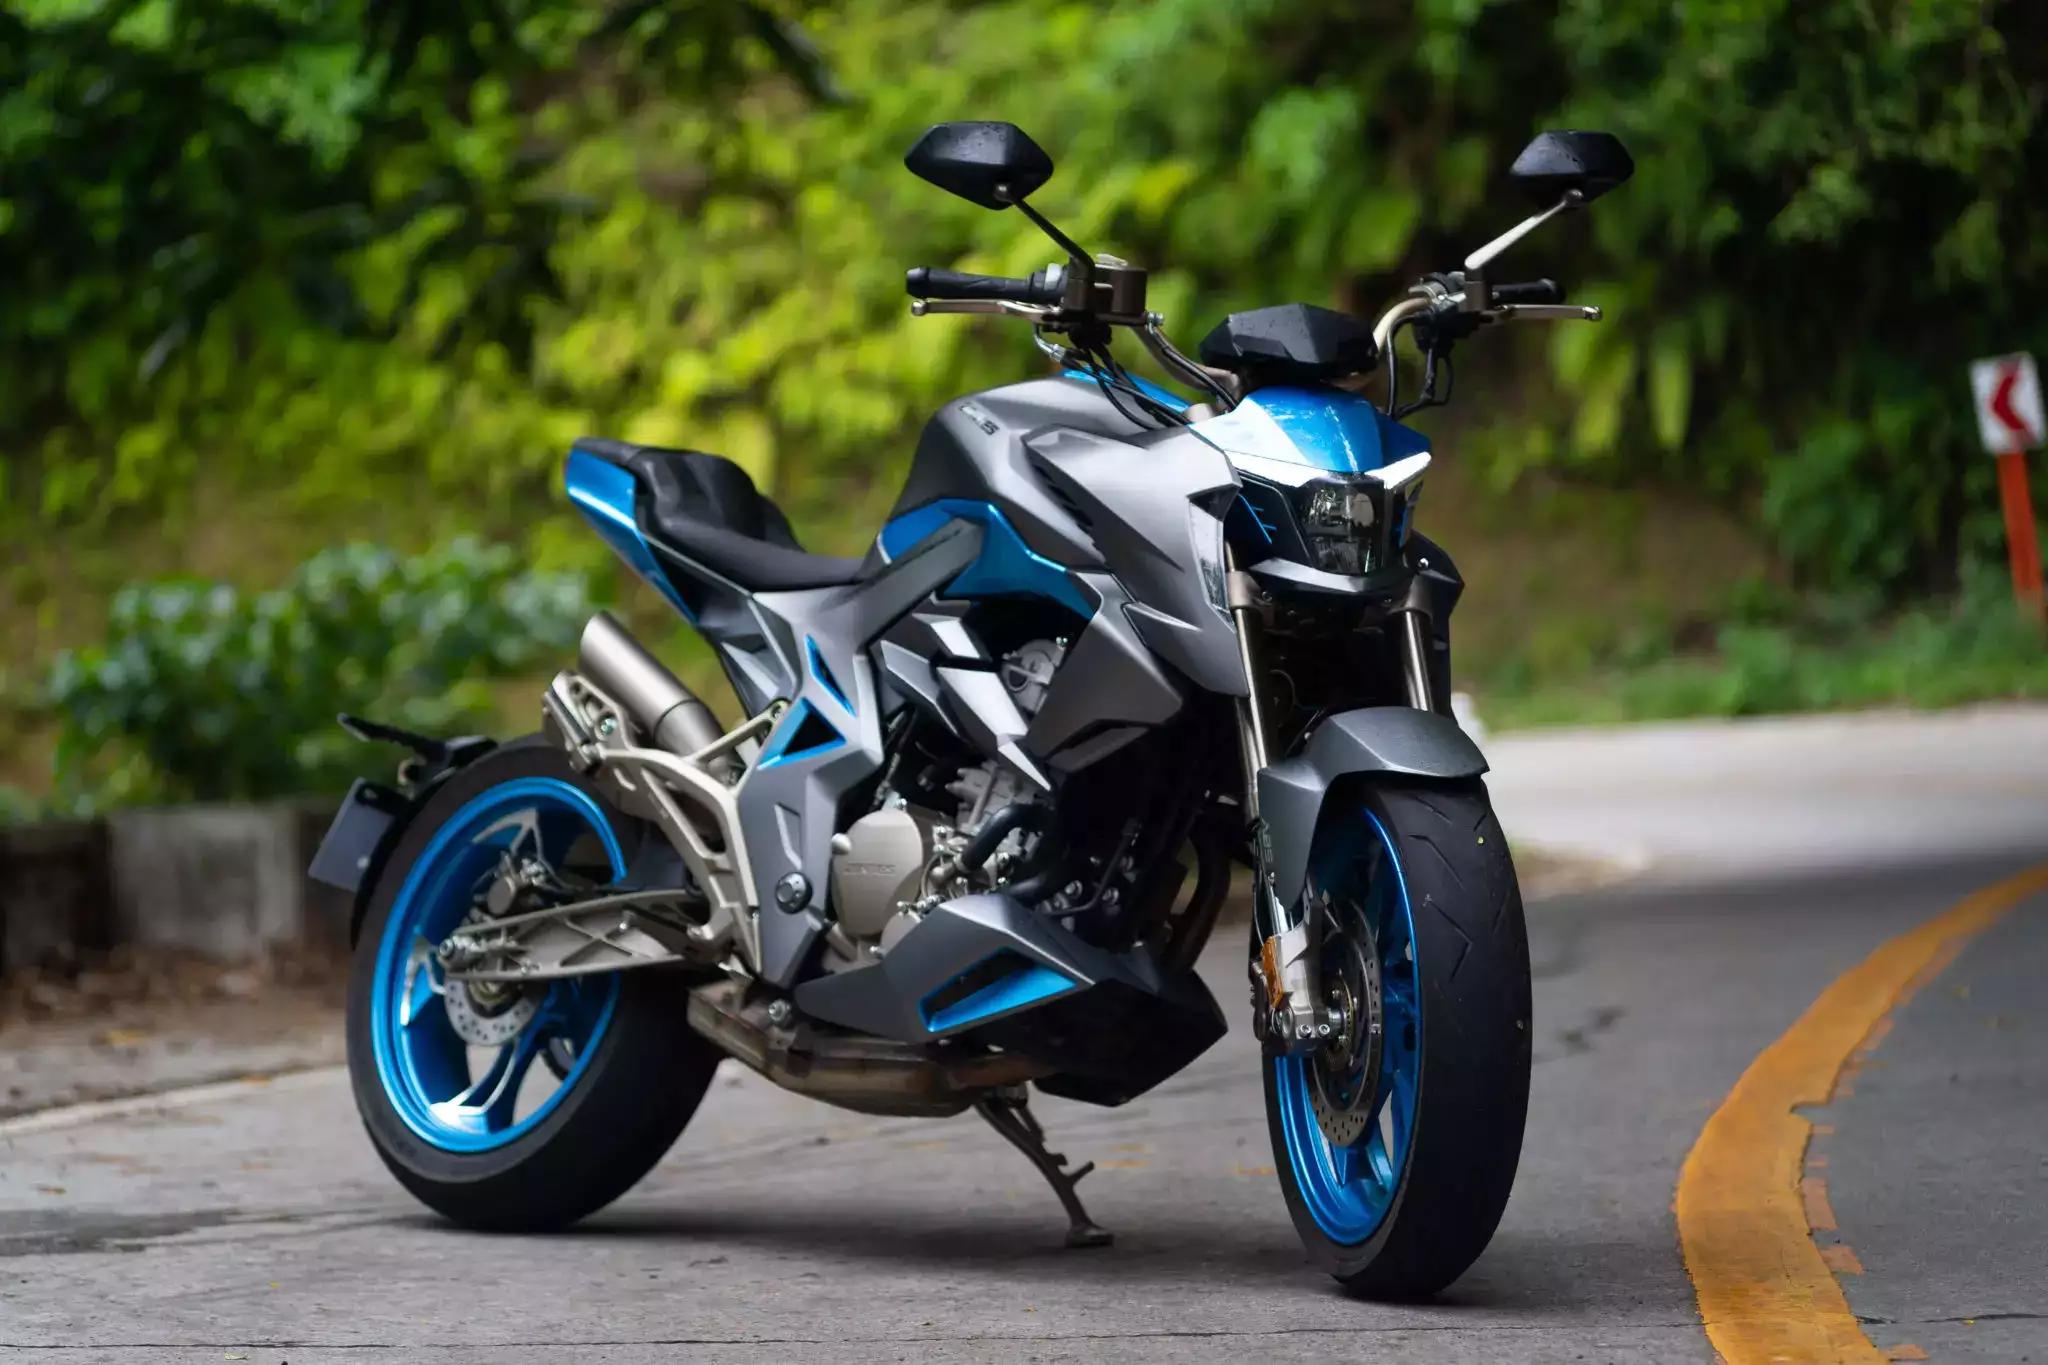 New Zontes Motorcycles Launched in India, Price starts at 3.15 Lakh